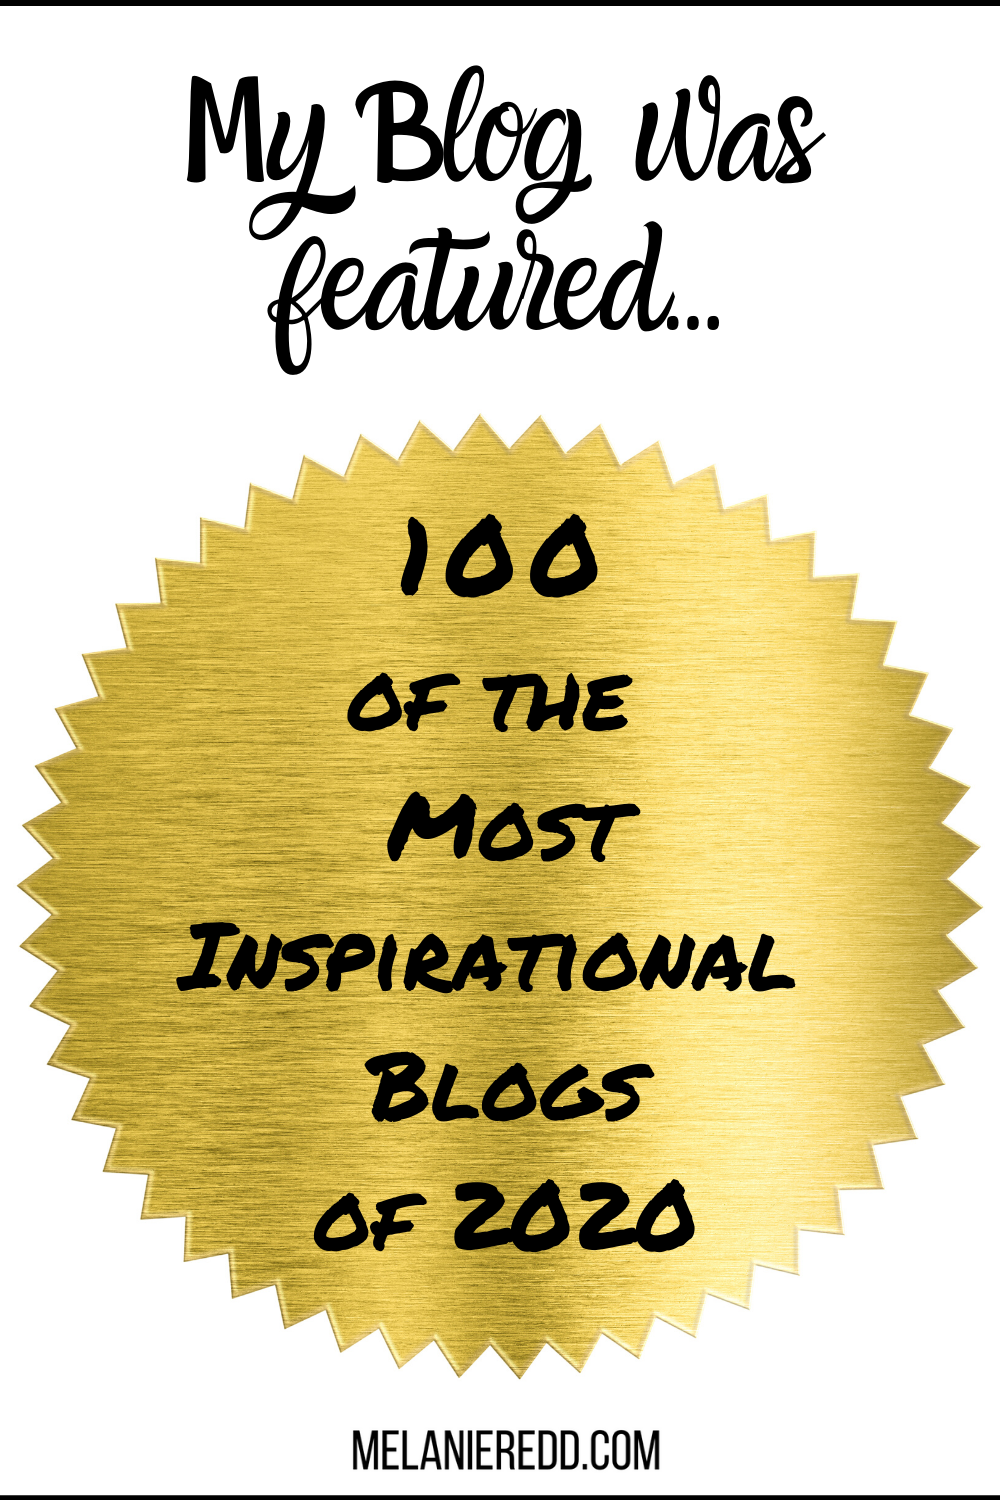 Some people like to paint, work in the garden, or exercise for fun. And, others love to run, or sew, or read, or watch Netflix. But, I love to visit inspirational blogs in my spare time. Here are 100 of the most inspirational Christian blogs of 2020 that I have found. Why not drop by and check out the list? #blogs #inspirationalblogs #blogs2020